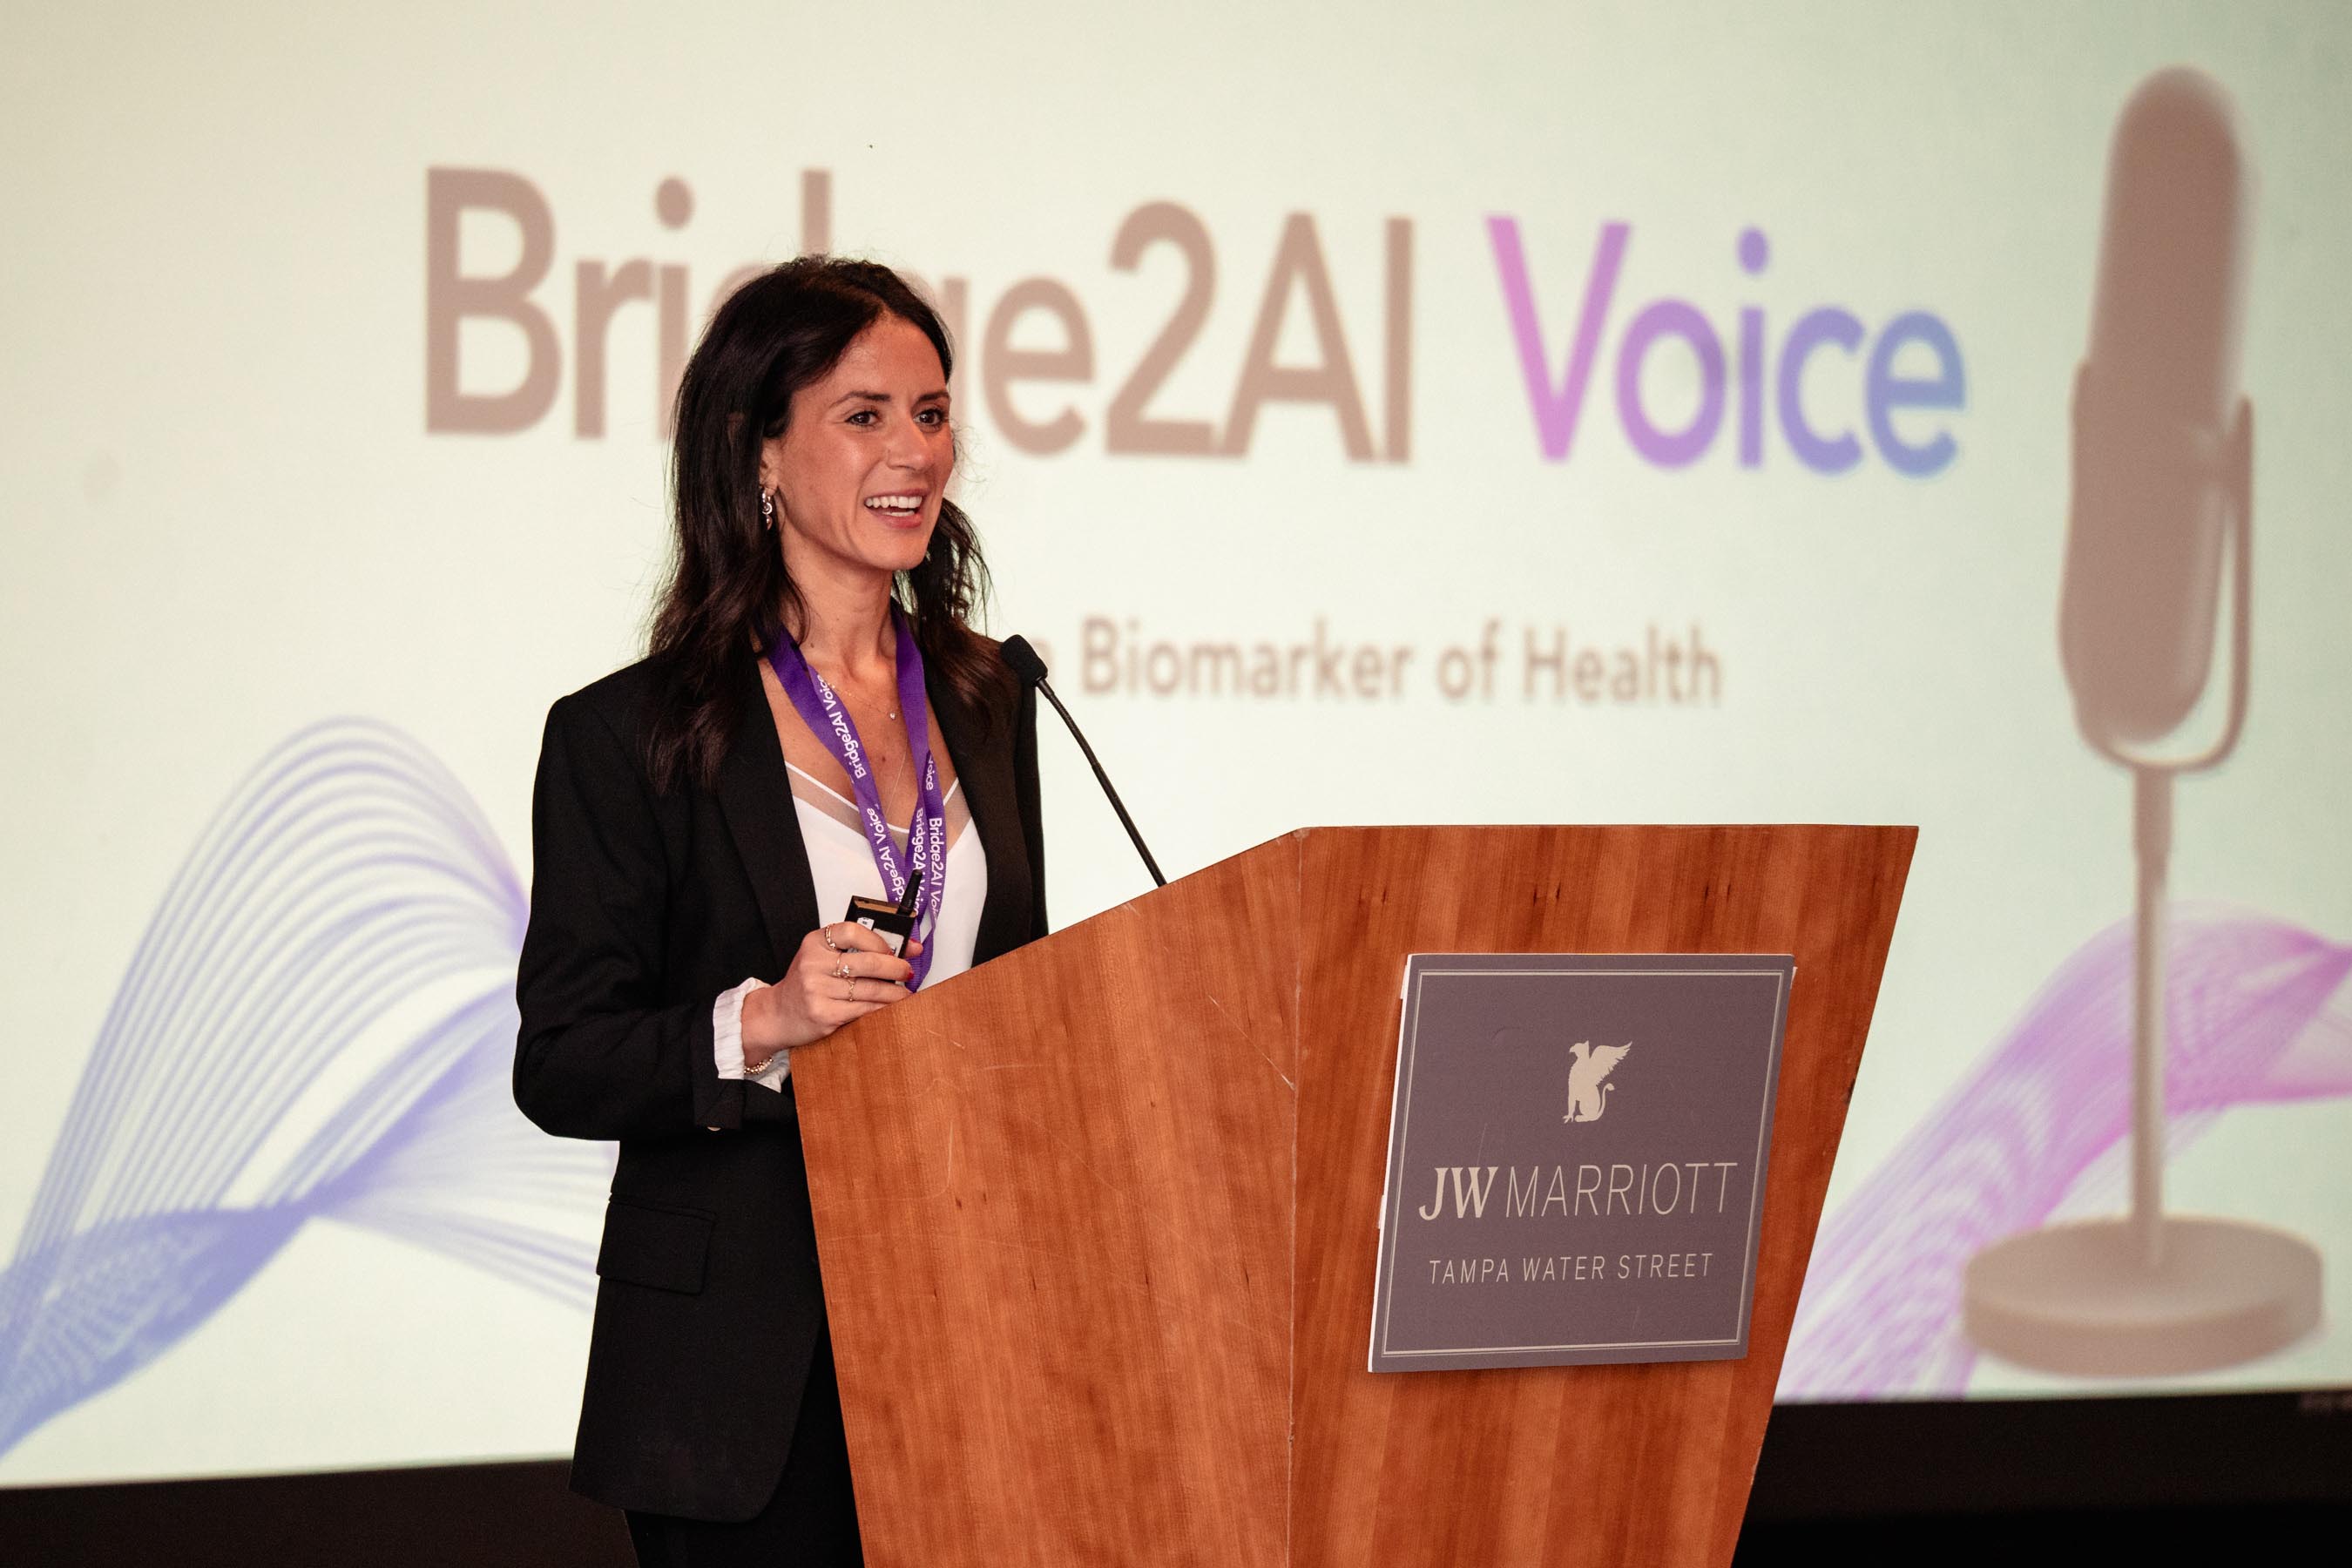 Dr. Yael_Bensoussan speaking at a podium with a black blazer and white shirt on. A screen behind her reads: Bridge 2AI Voice